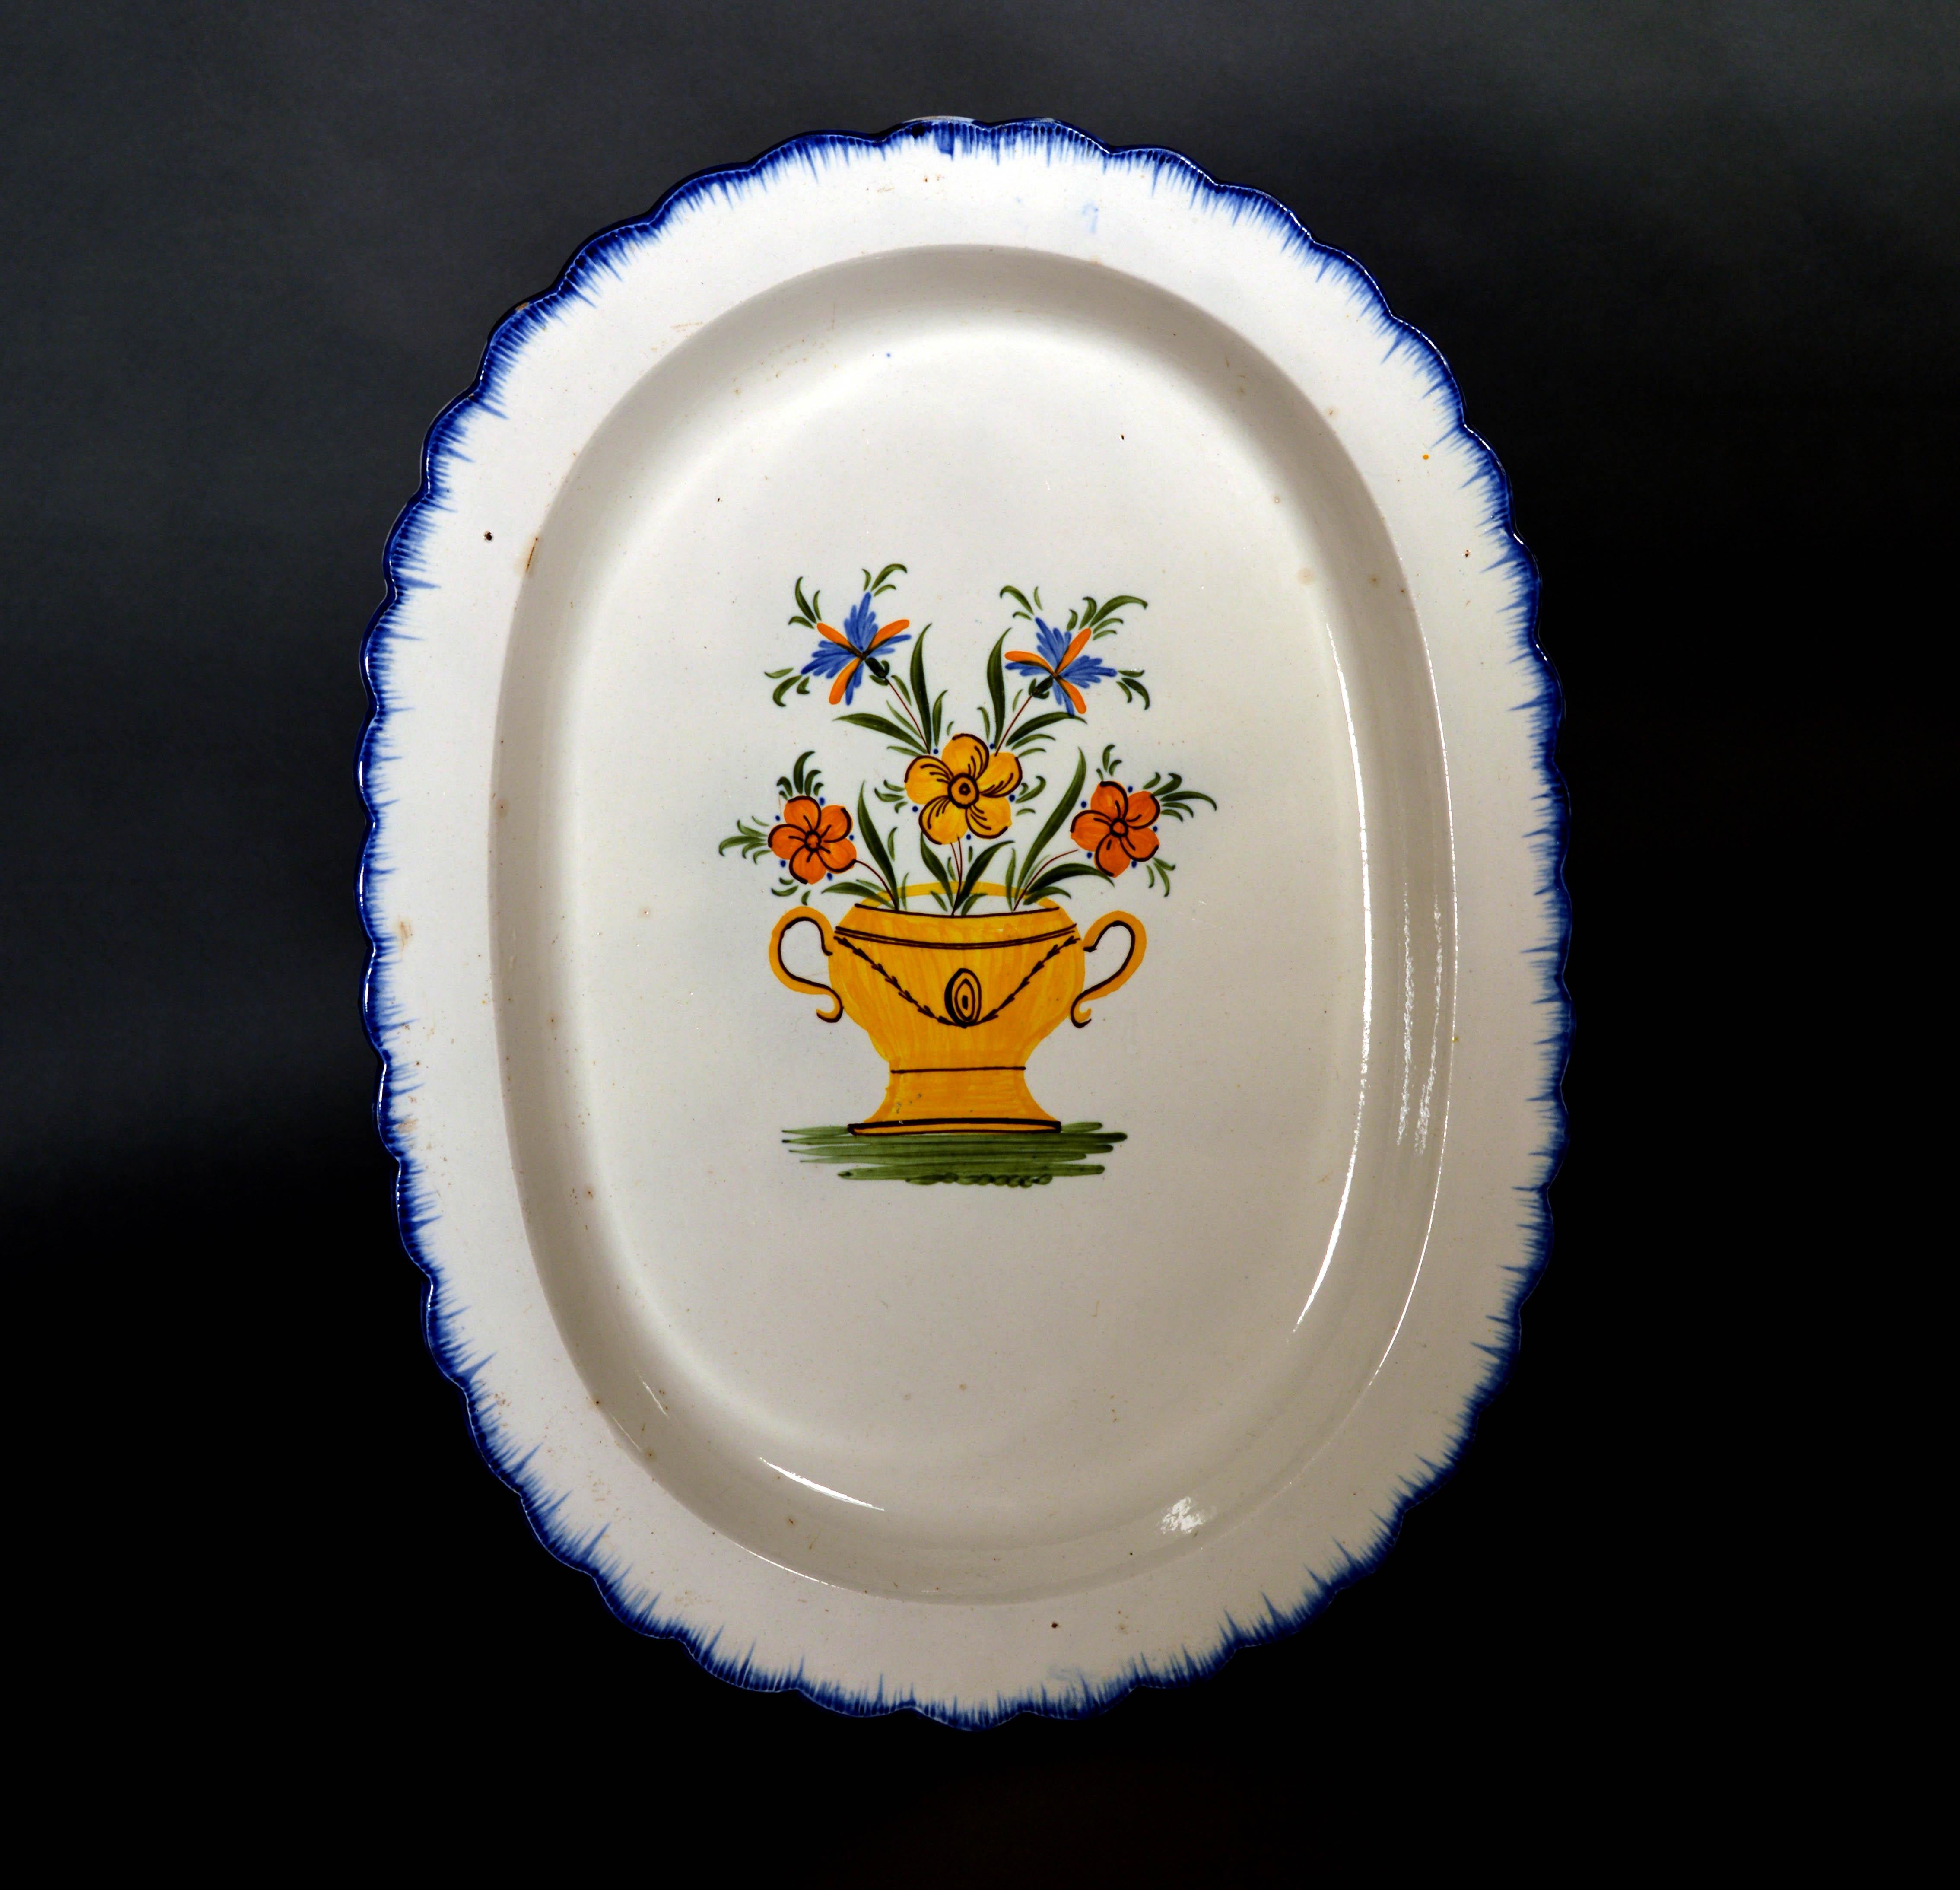 Shell-edge prattware oval dish painted with an urn of flowers,
1800-1820

The oval deep dish has a shaped border in blue with a painted blue shell-edge design. The central well is painted with a large yellow urn with brown details at the border foot